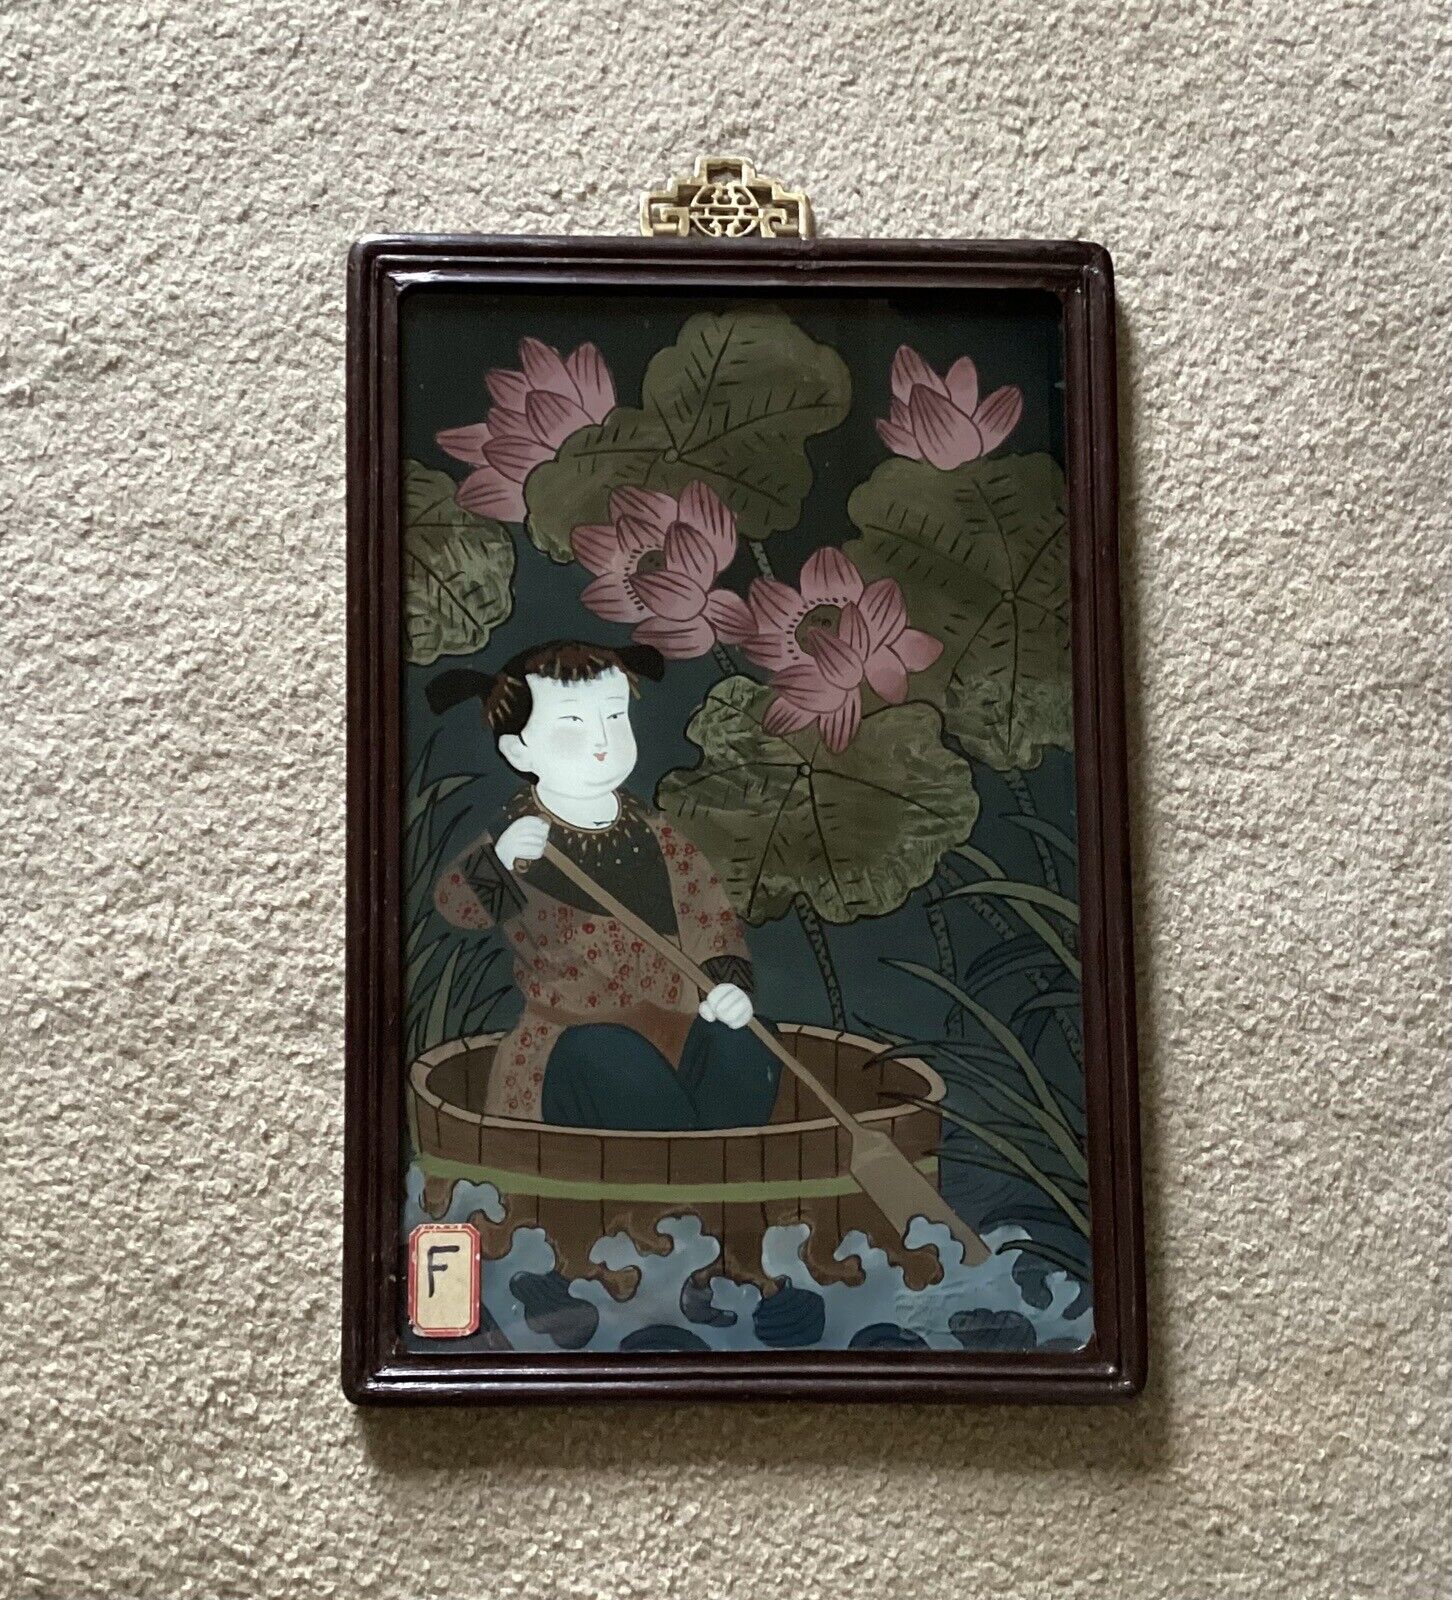 VTG/Antique R.O.C. Chinese Reverse Glass Painting, Girl In Boat